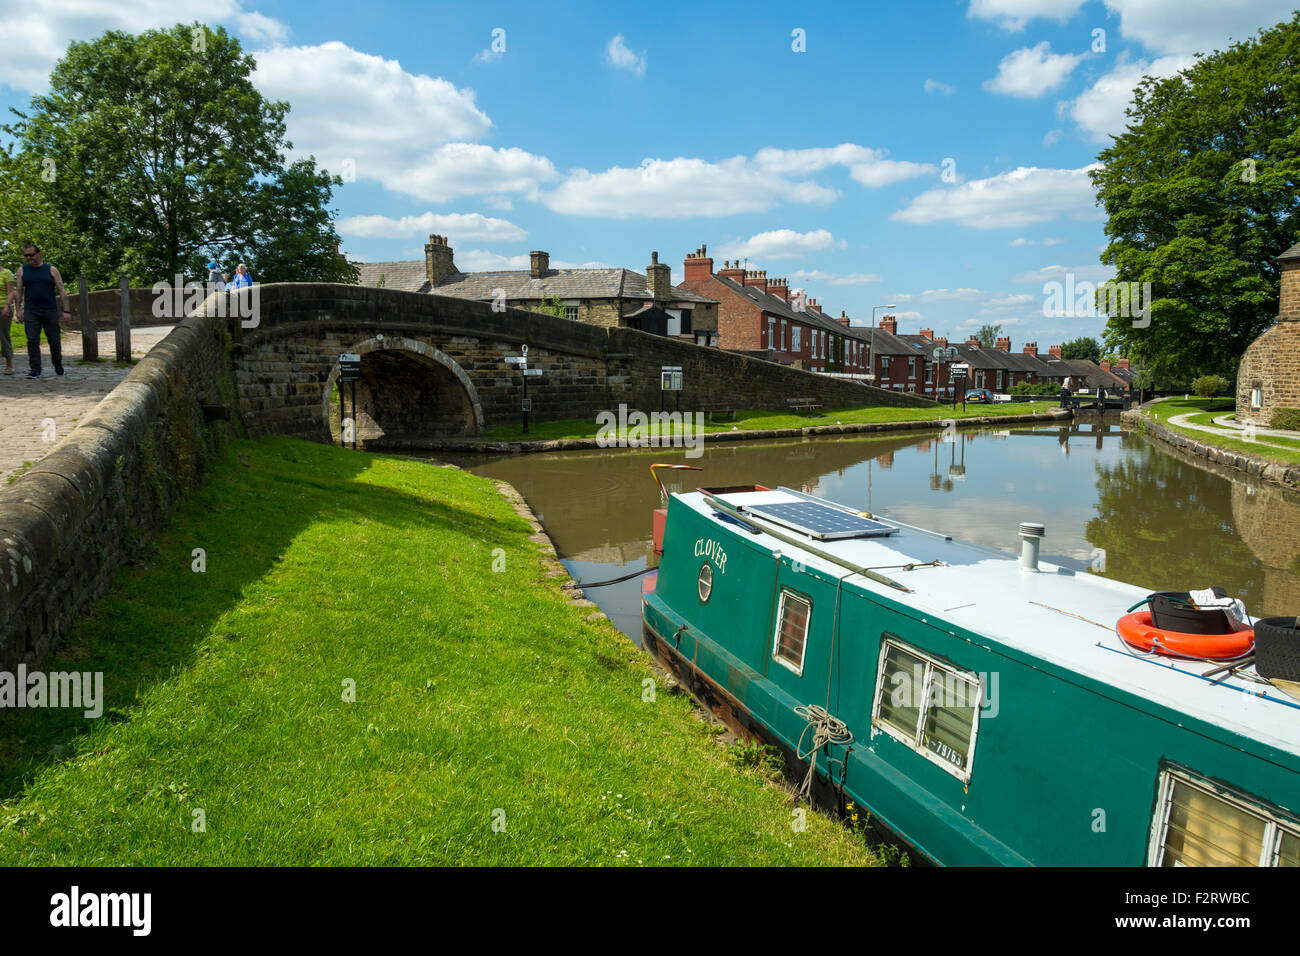 Narrowboat at the junction of the Peak Forest and Macclesfield canals at Marple, Greater Manchester, England, UK. Stock Photo